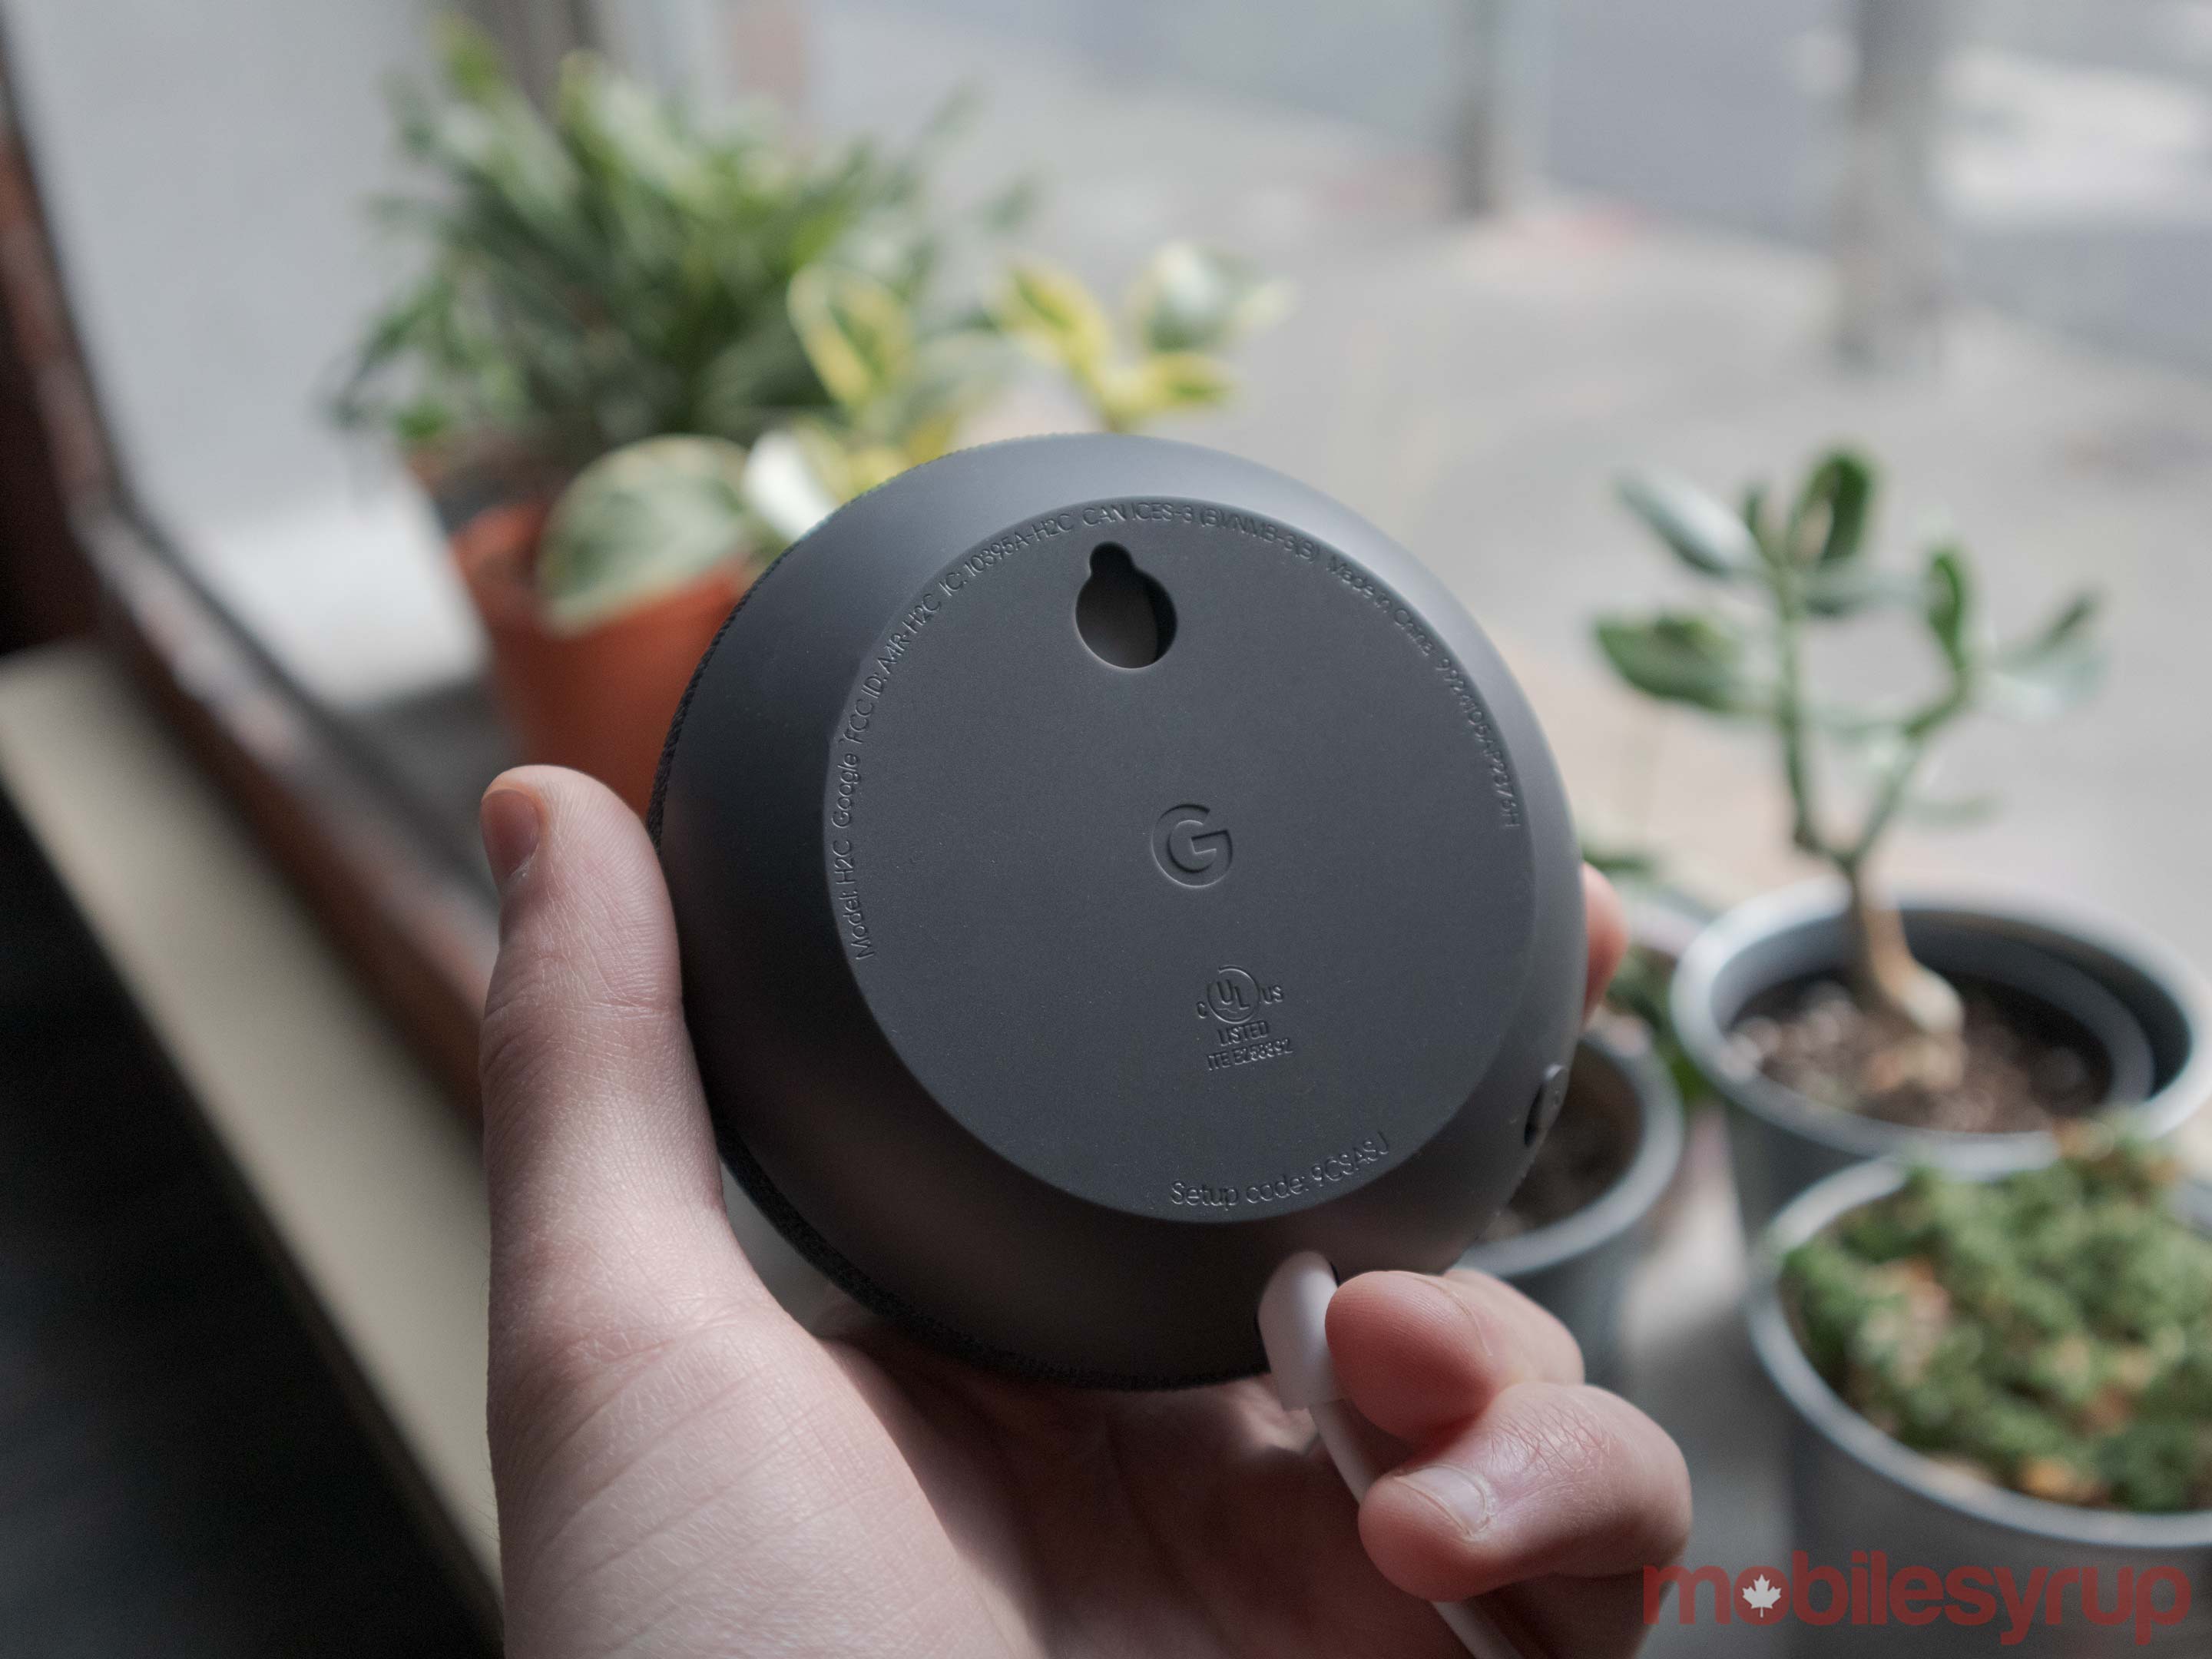 Google's new Nest Mini sounds better, especially on a wall